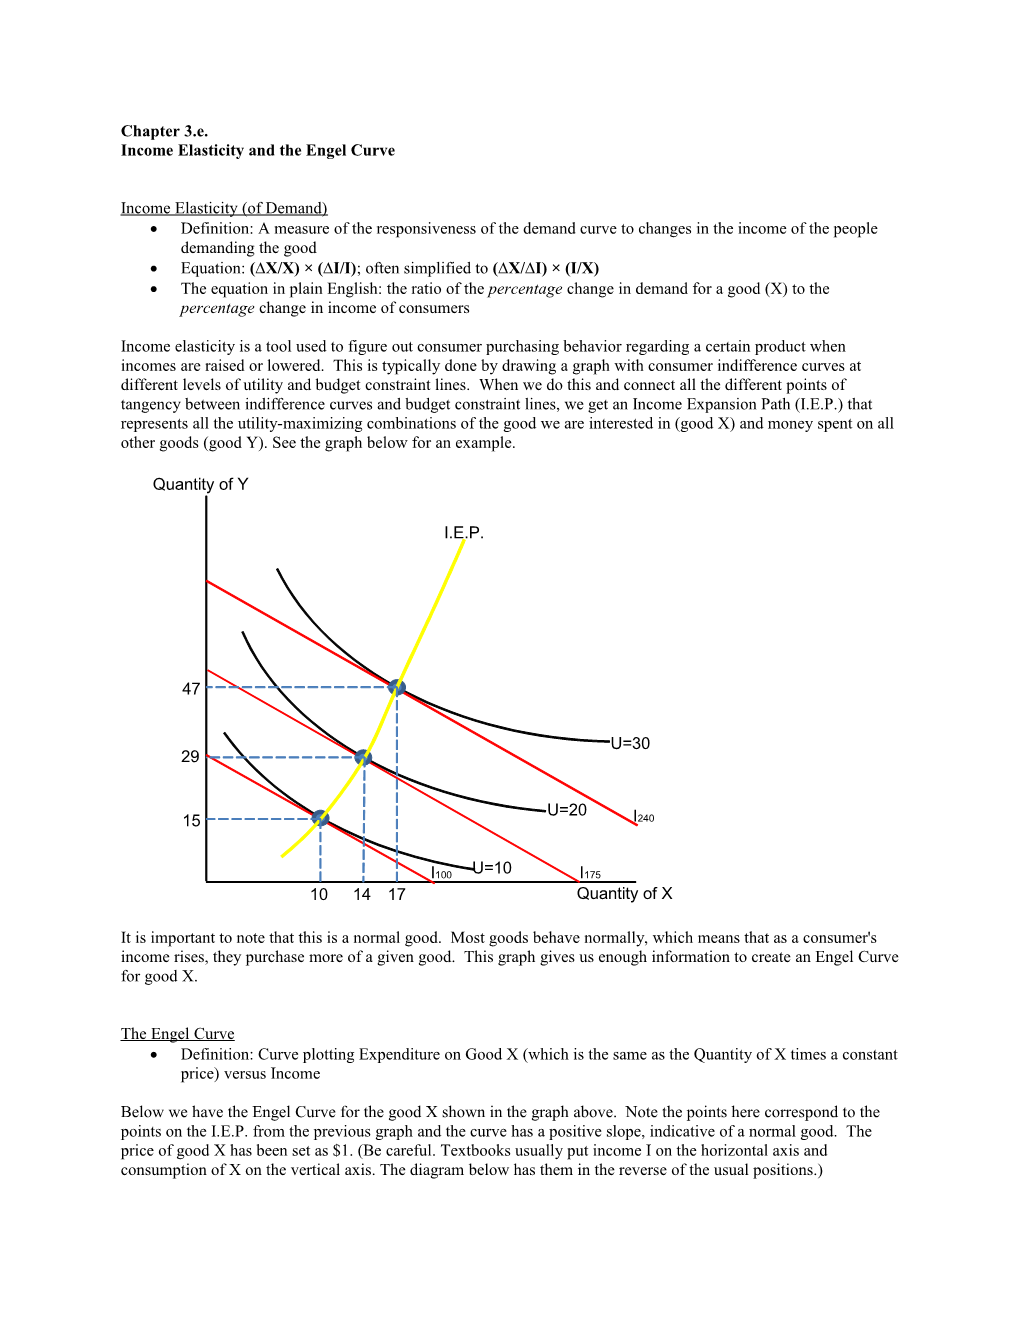 Income Elasticity and the Engel Curve